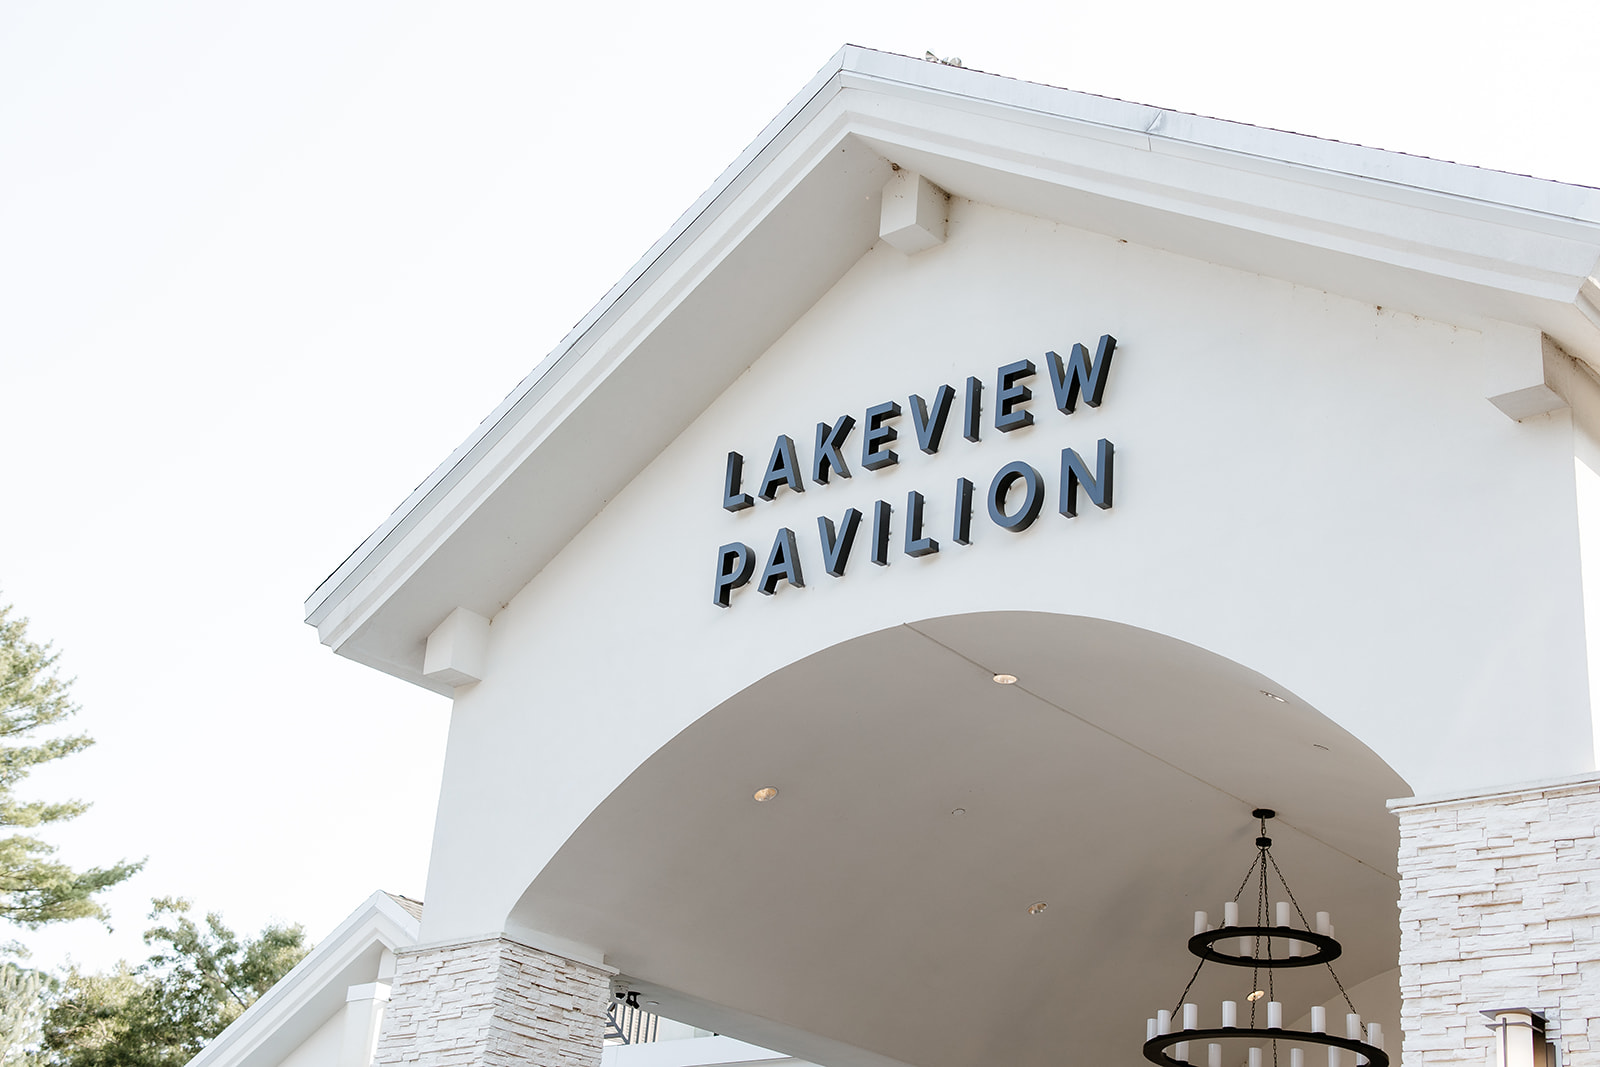 Exterior signage of "lakeview pavilion" on a building with an arched entrance.